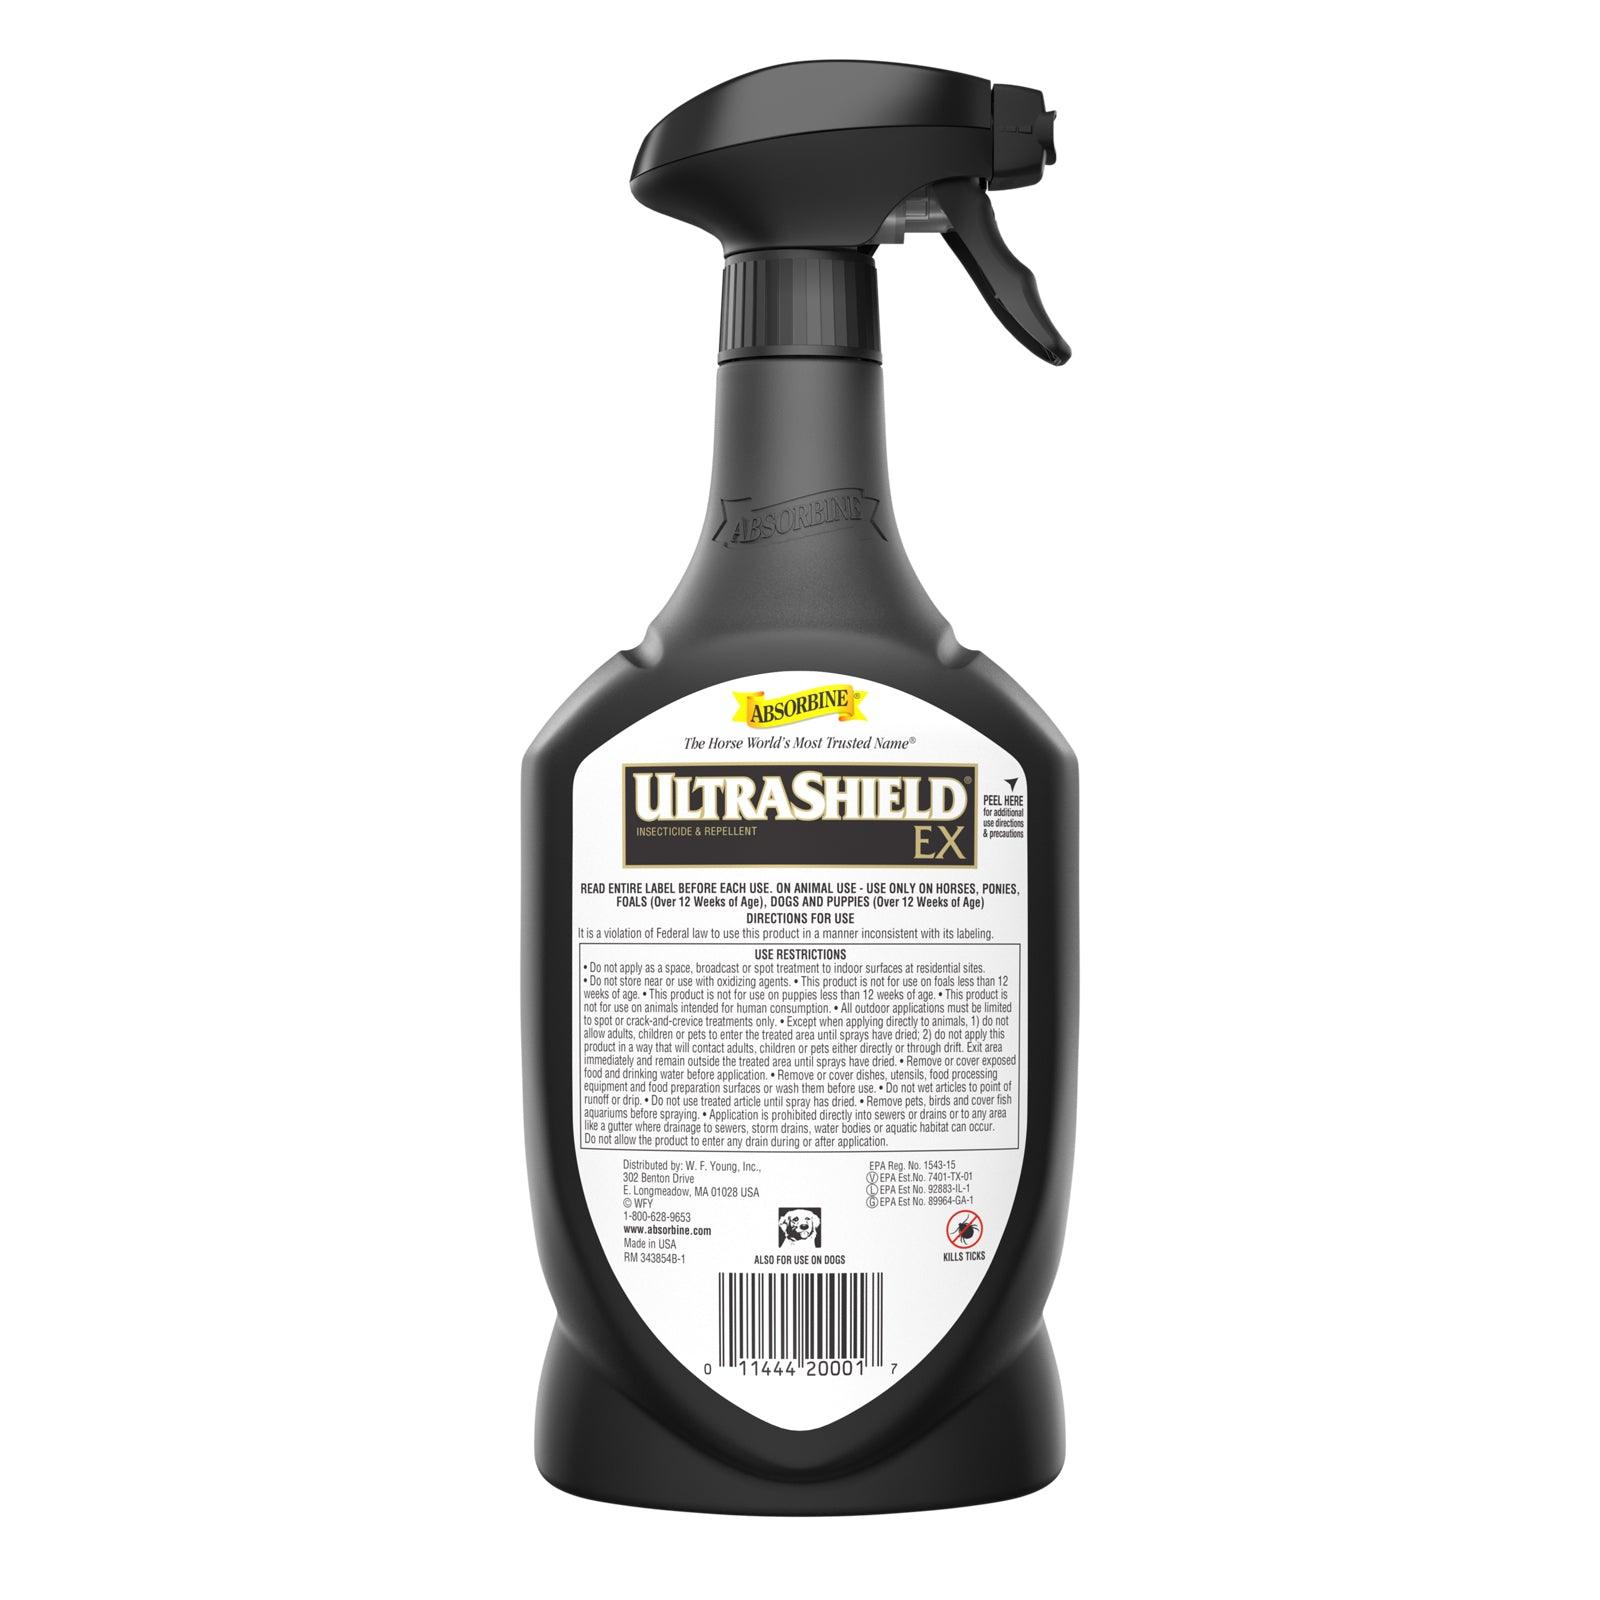 UltraShield® EX Insecticide & Repellent Fly Control absorbine   